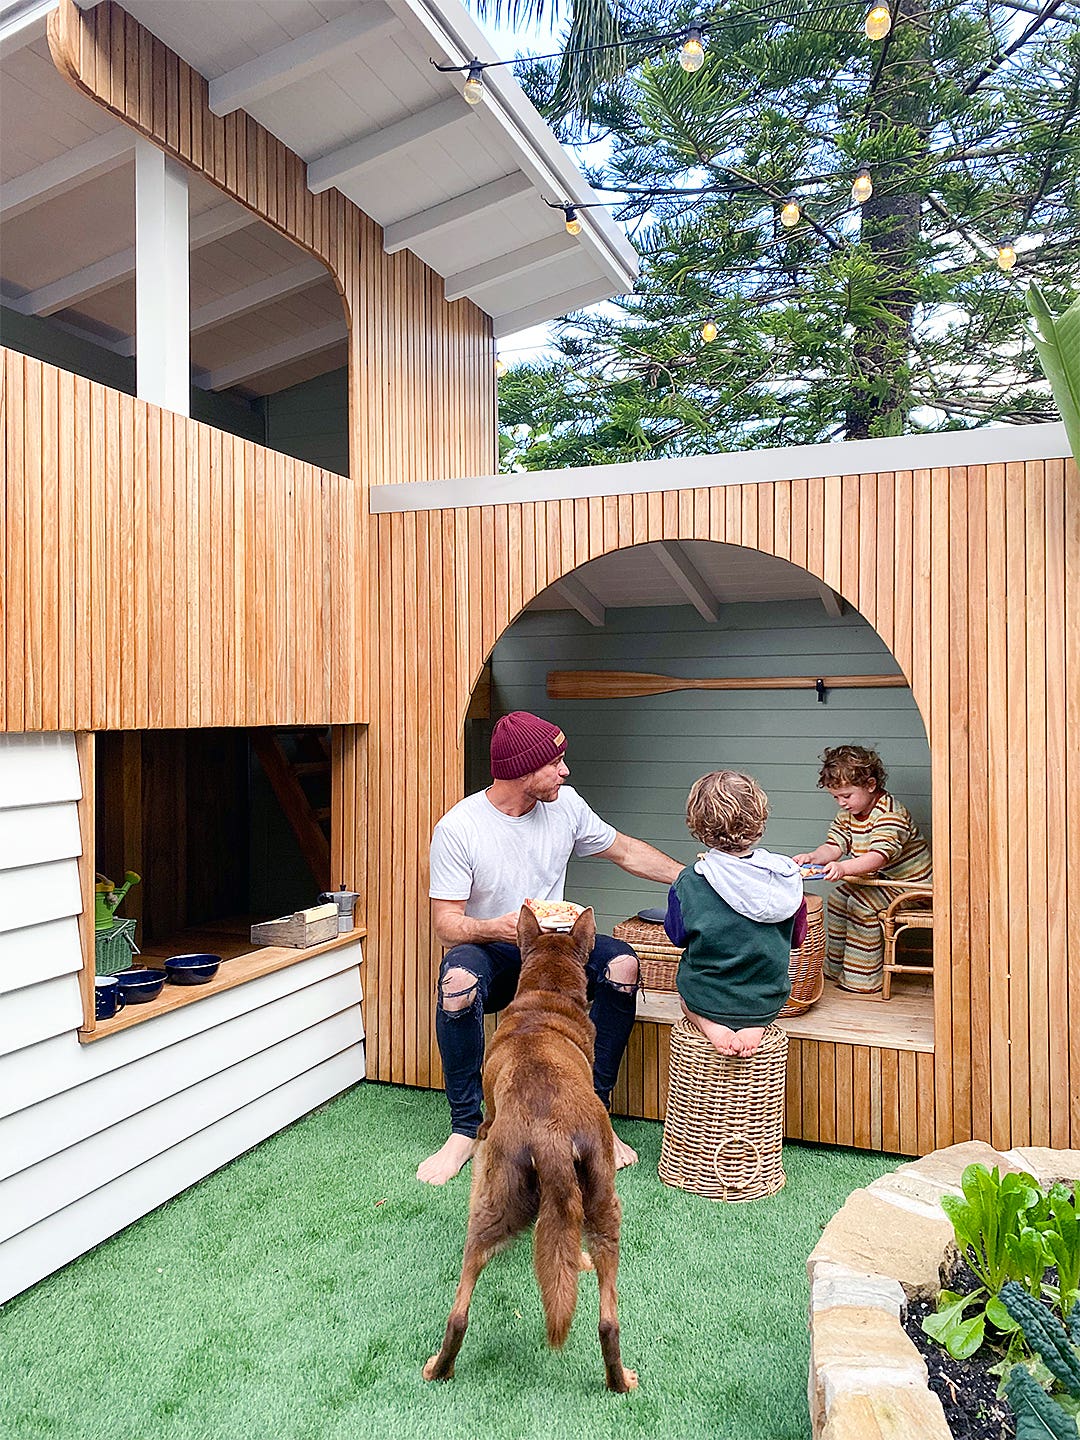 A Slide Made From Scratch Makes This Two-Level Playhouse Triple the Fun